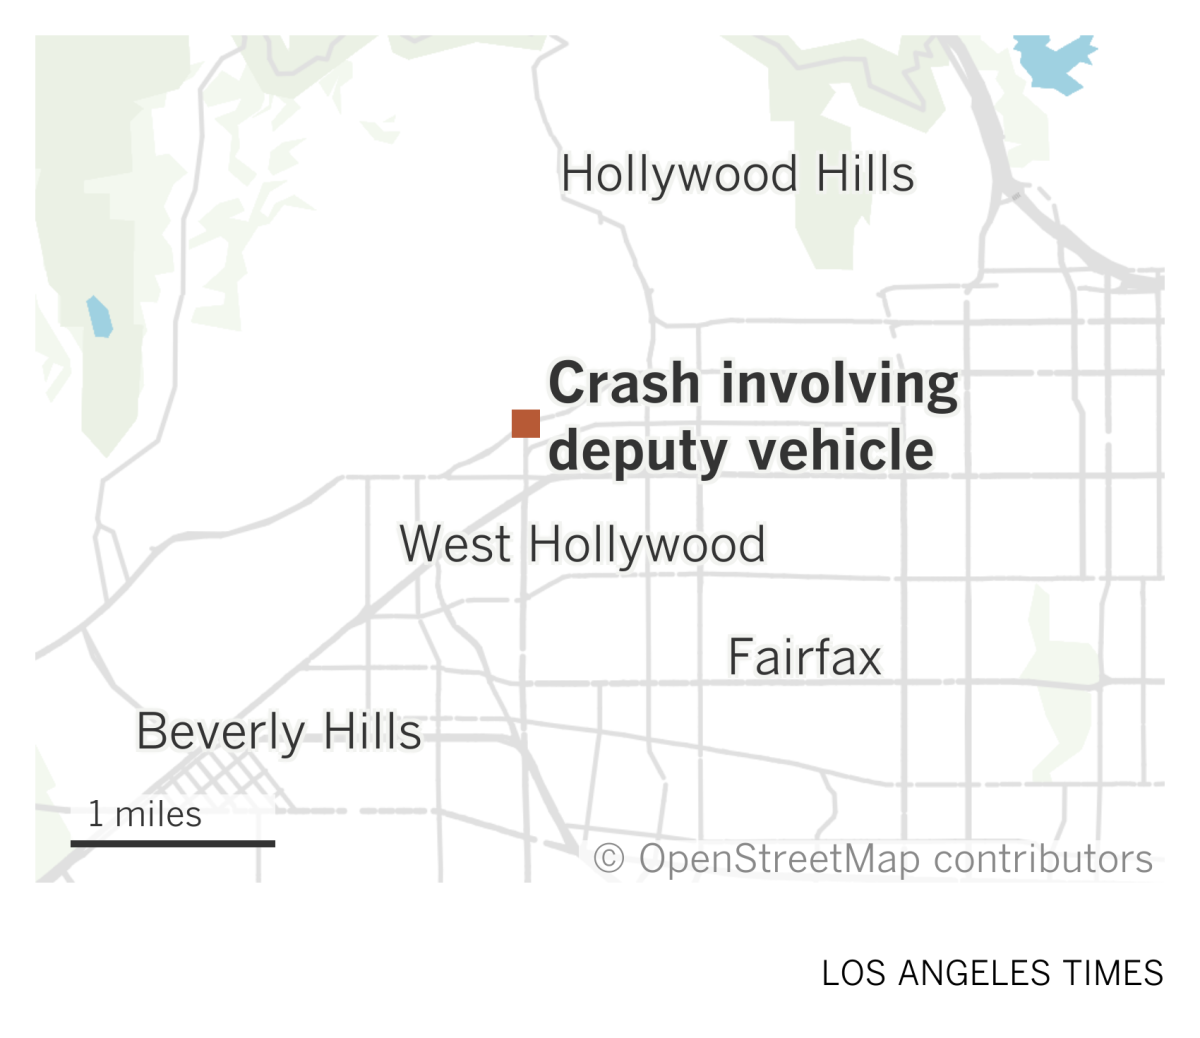 A map of the L.A. area shows the location of a crash involving a sheriff's deputy vehicle in West Hollywood